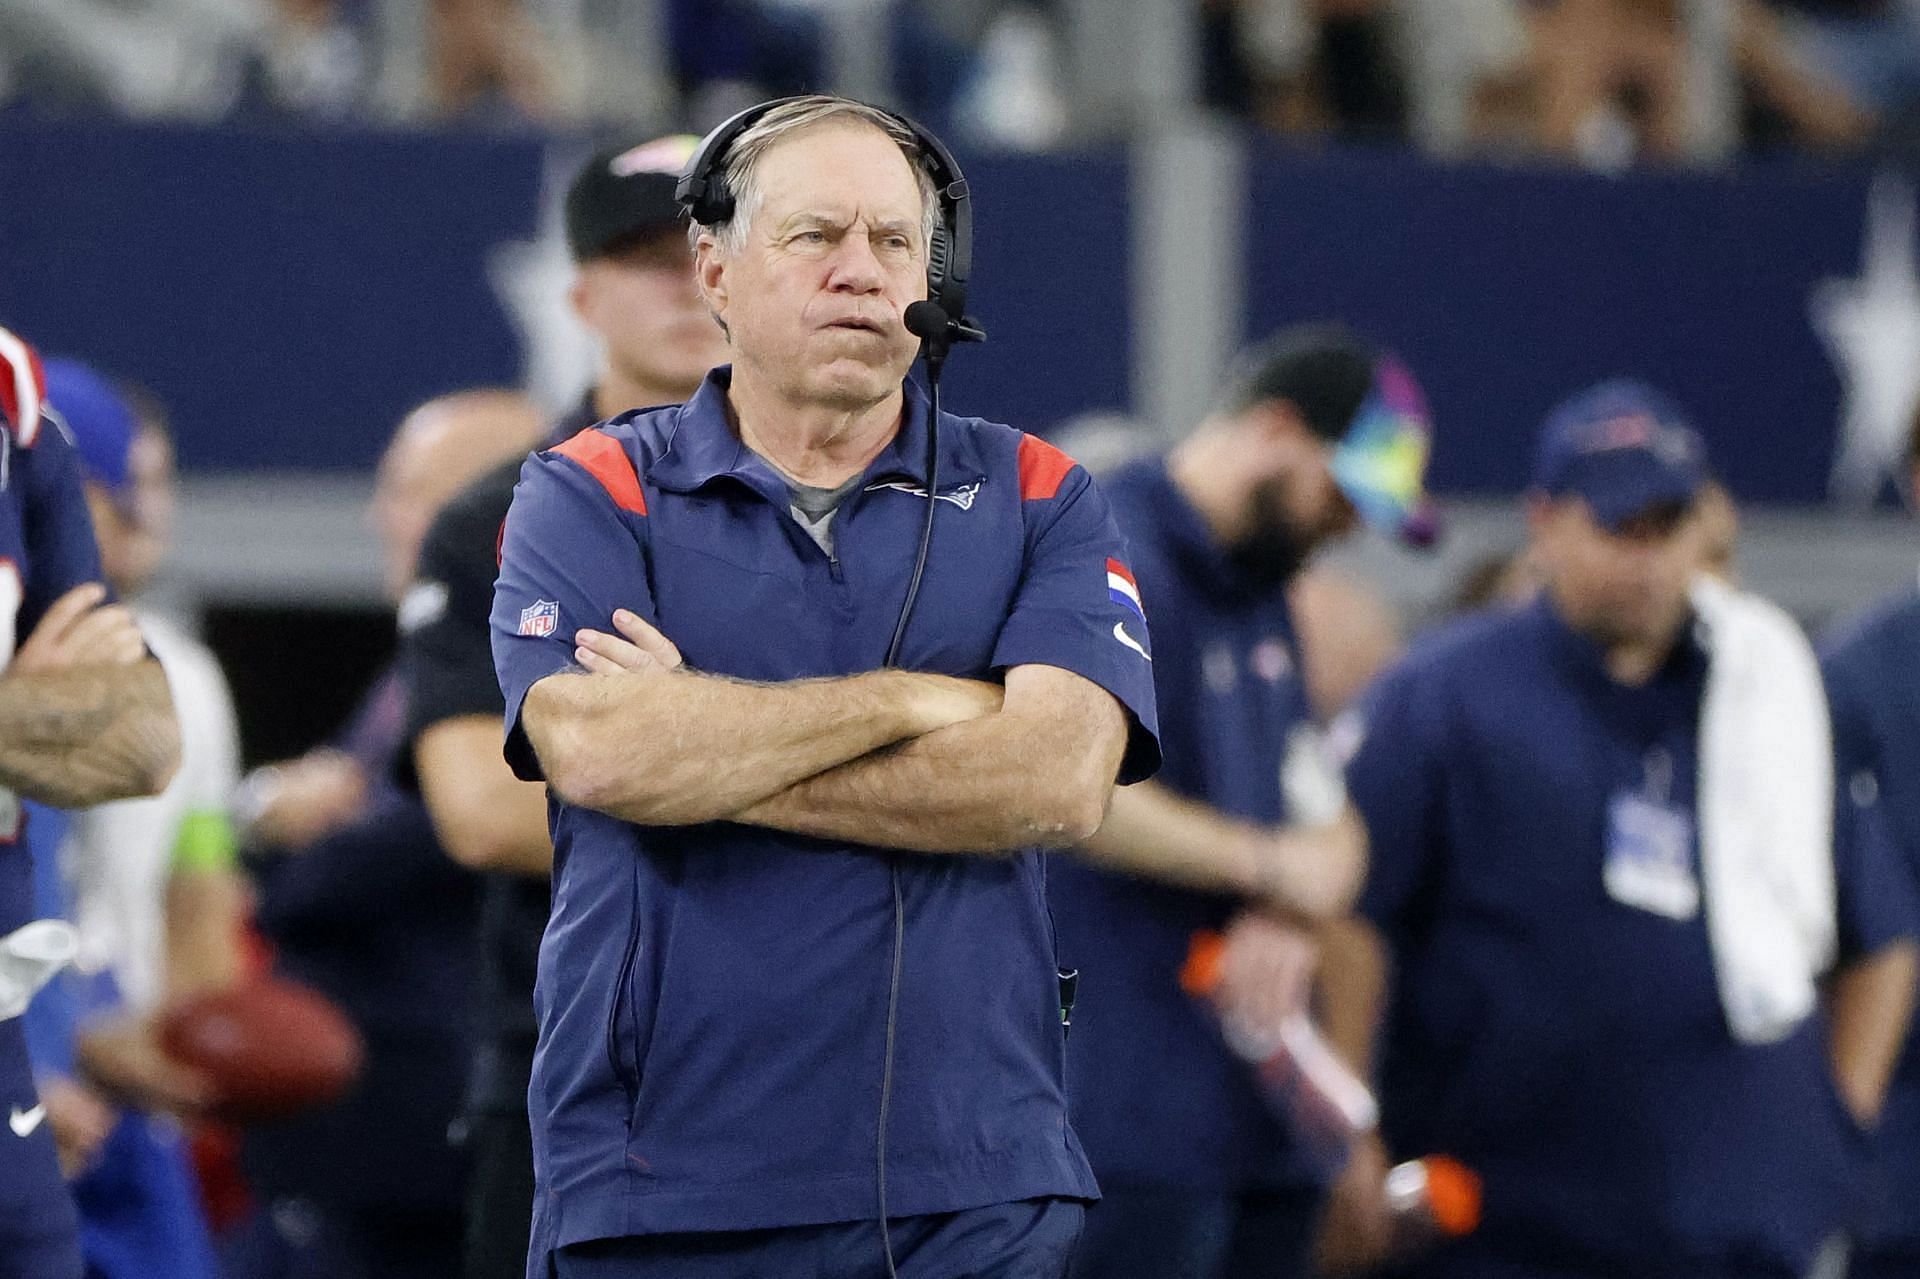 Who is Ernie Adams? Former Patriots Vice President of Player Personnel spotlights key departure leading to Bill Belichick&rsquo;s decline